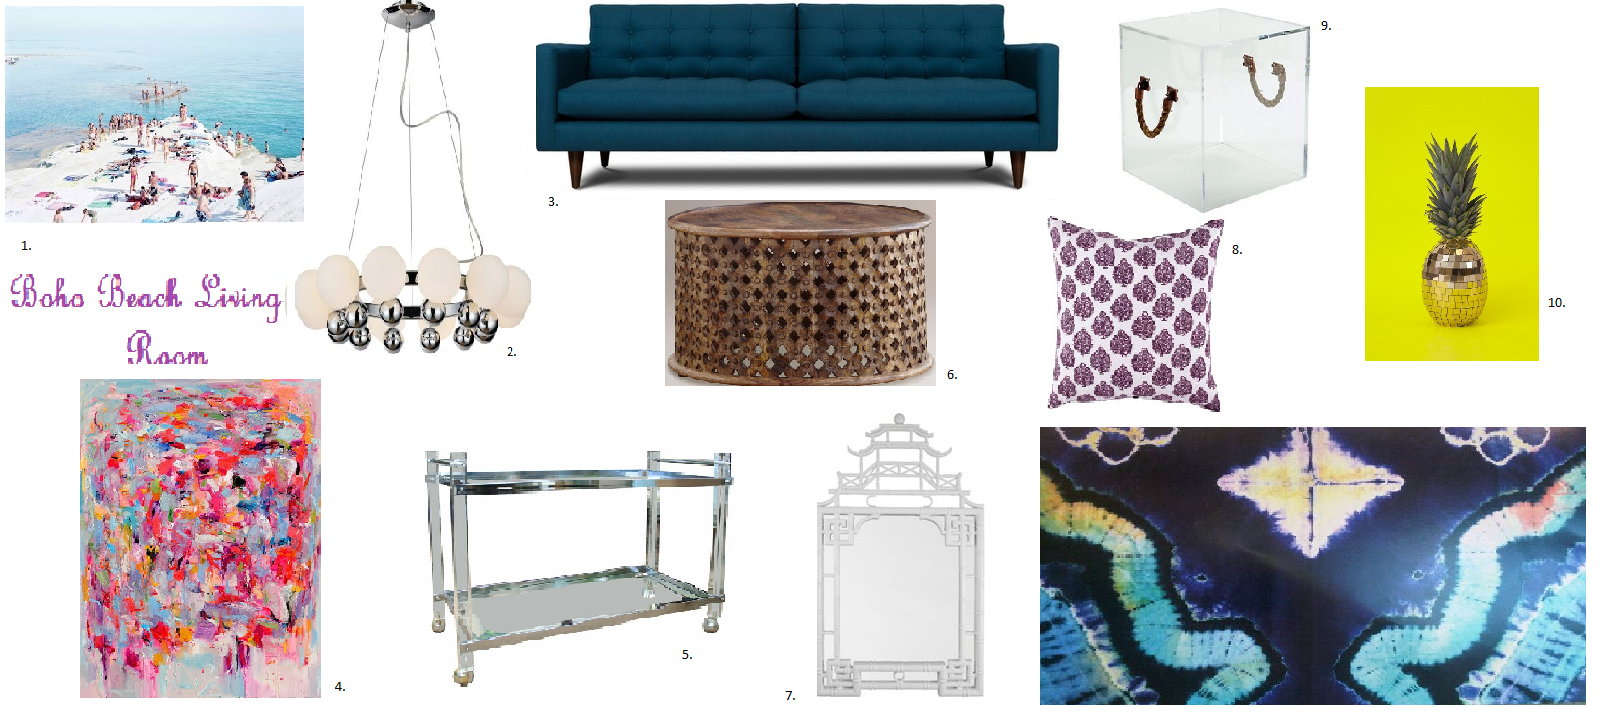 Nomad Luxuries collage of decorative elements for a boho styled living room